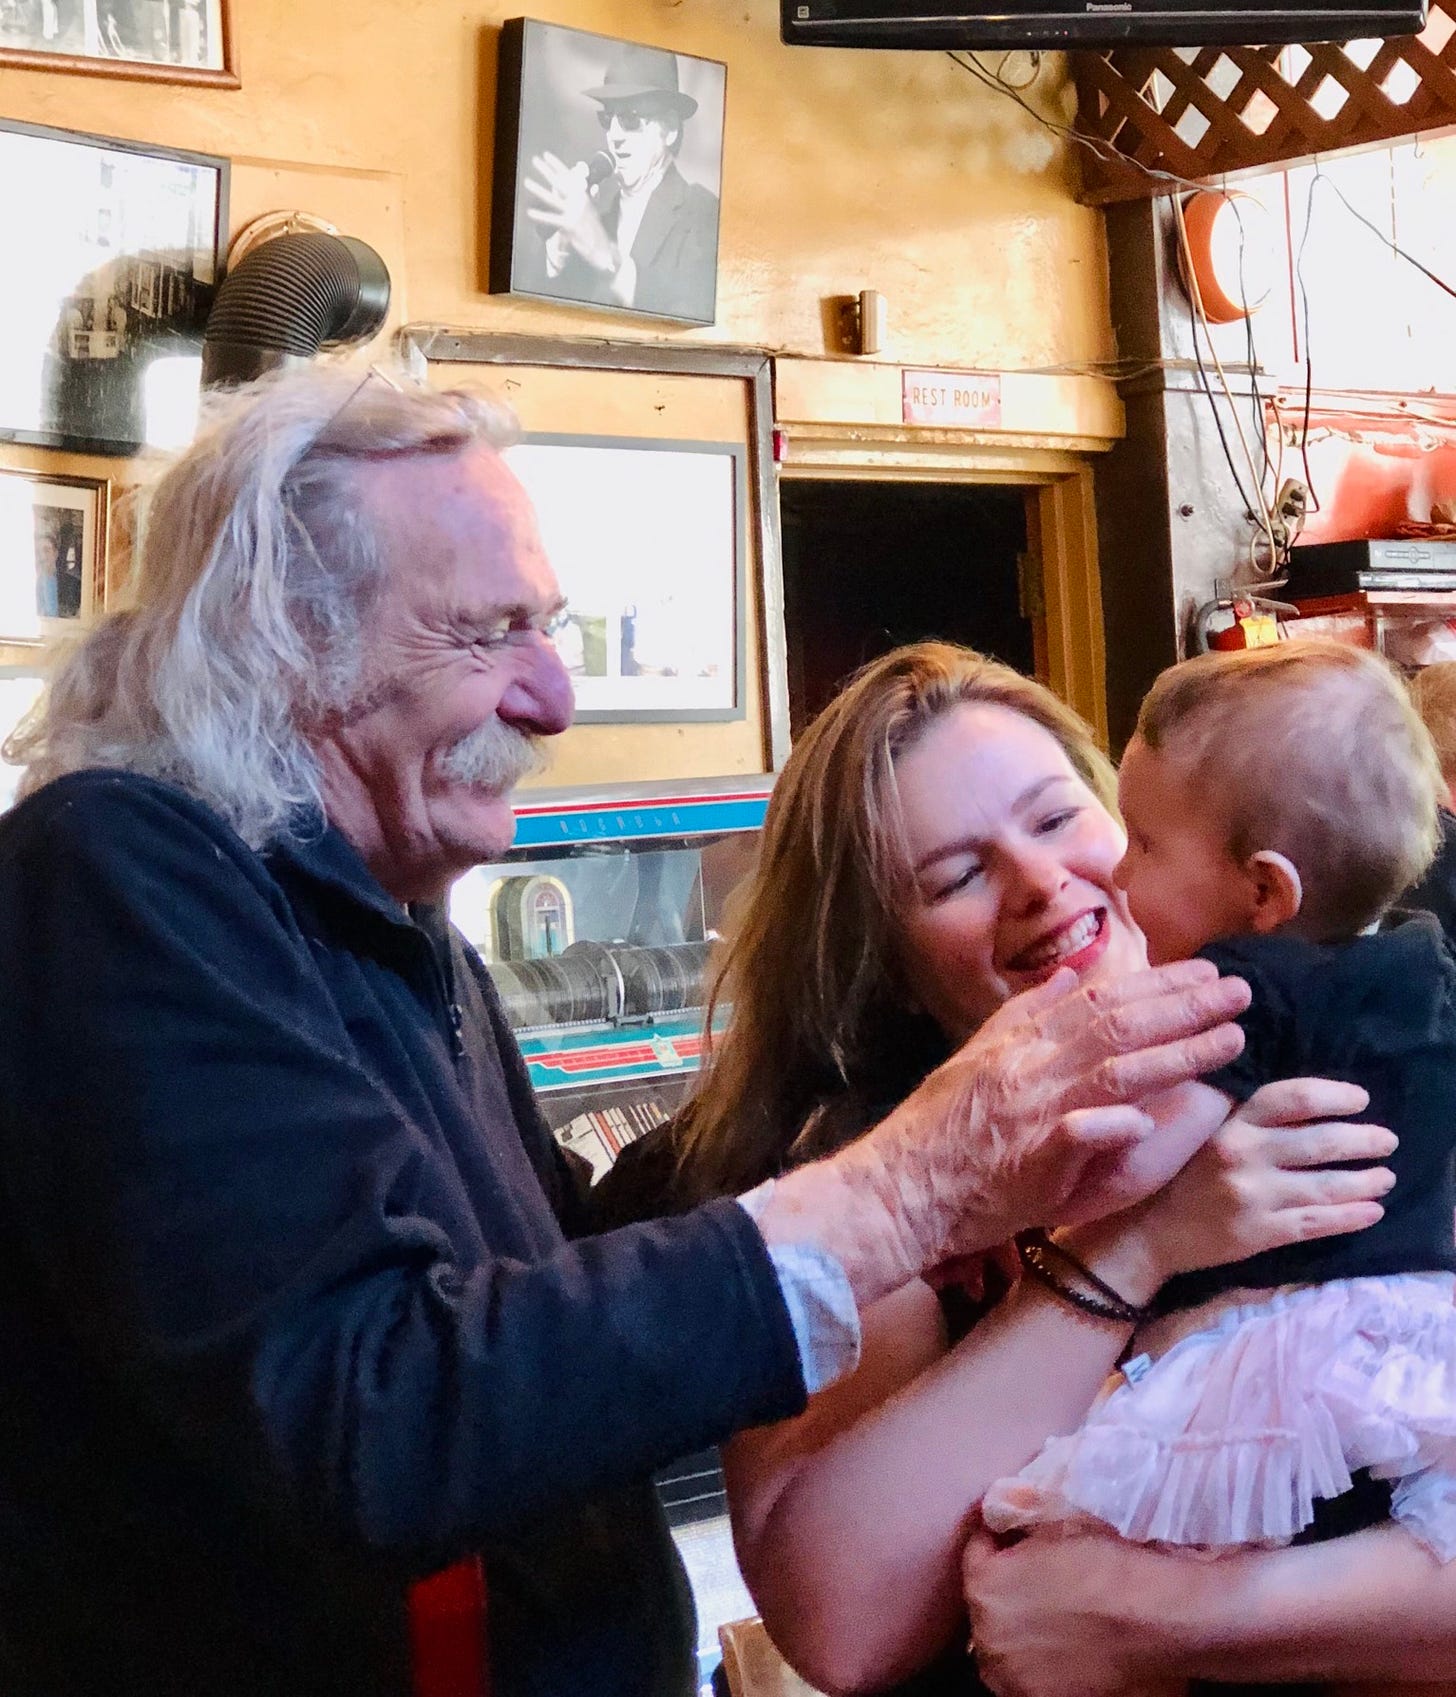 Jack Hirschman and Amber Tamblyn stand next to each other. Amber holds her infant daughter, Marlow, in her arms. Amber and Jack smile at Marlow as Jack puts his hand on Marlow's arm.